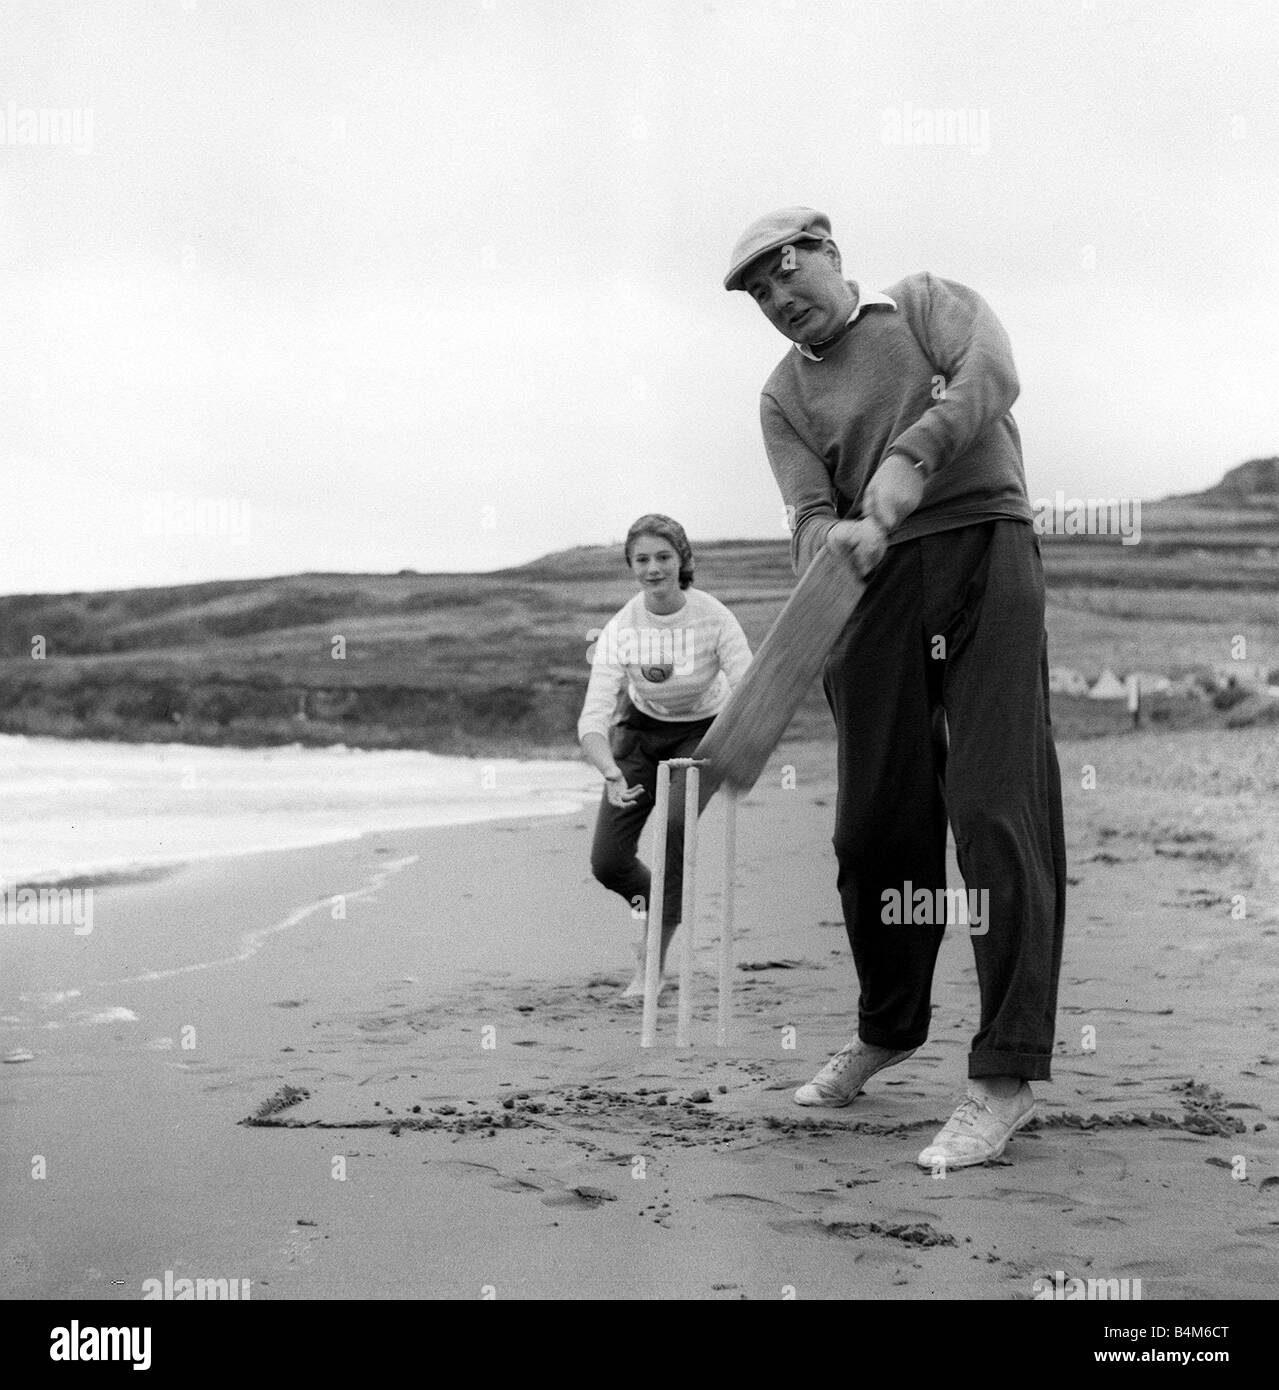 James Callaghan MP on Holiday AugUST 1957 in St Davids Pembrokeshire with family and dog Margaret Callaghan Baroness Jay keeps wicket during a game of Cricket Stock Photo